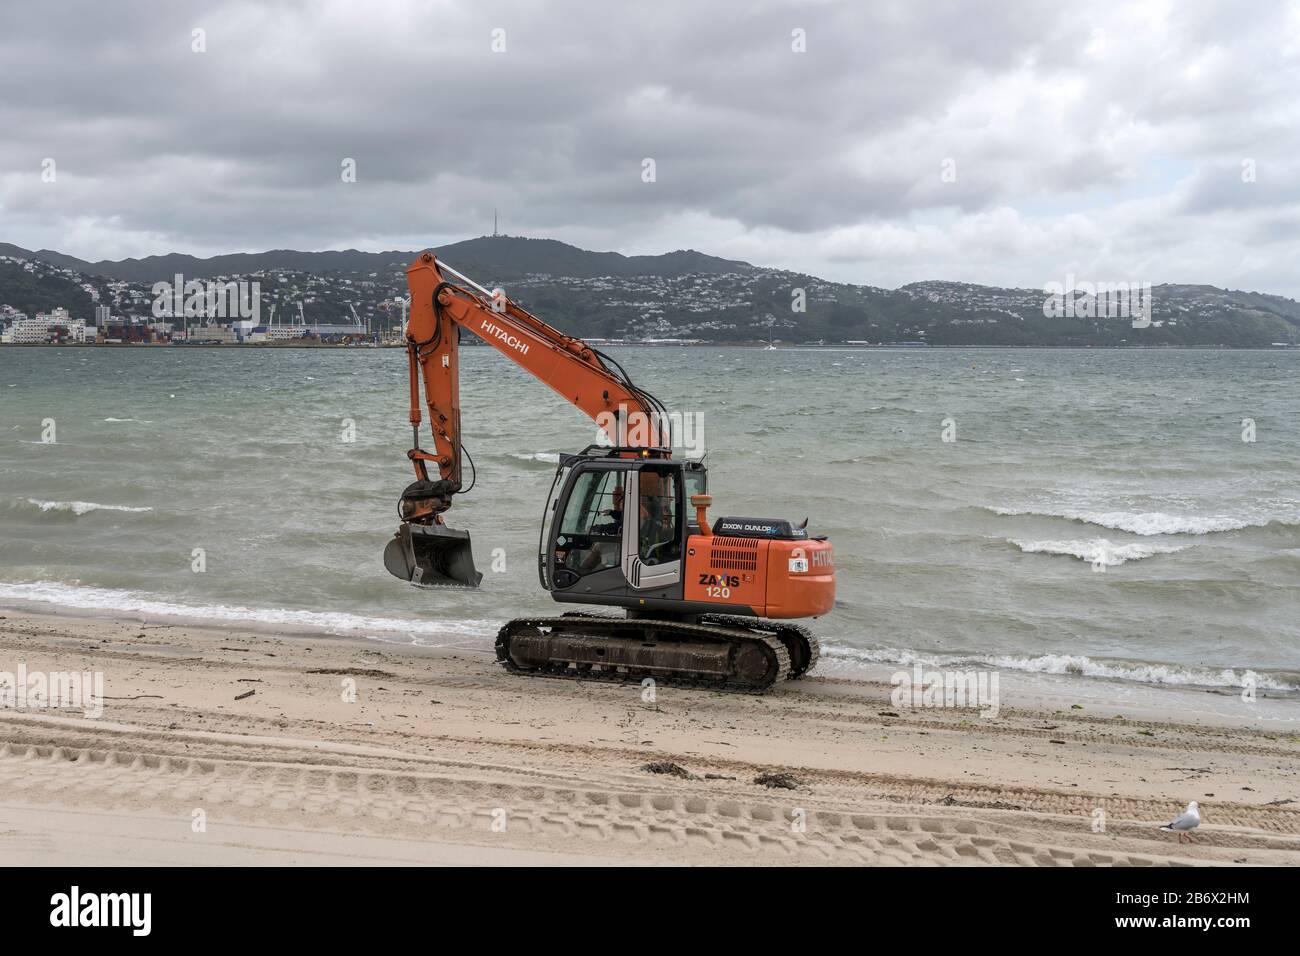 WELLINGTON, NEW ZEALAND - November 13 2019: cityscape with digger on sand beach at bay shore of Oriental Parade neighborhood, shot in bright cloudy sp Stock Photo